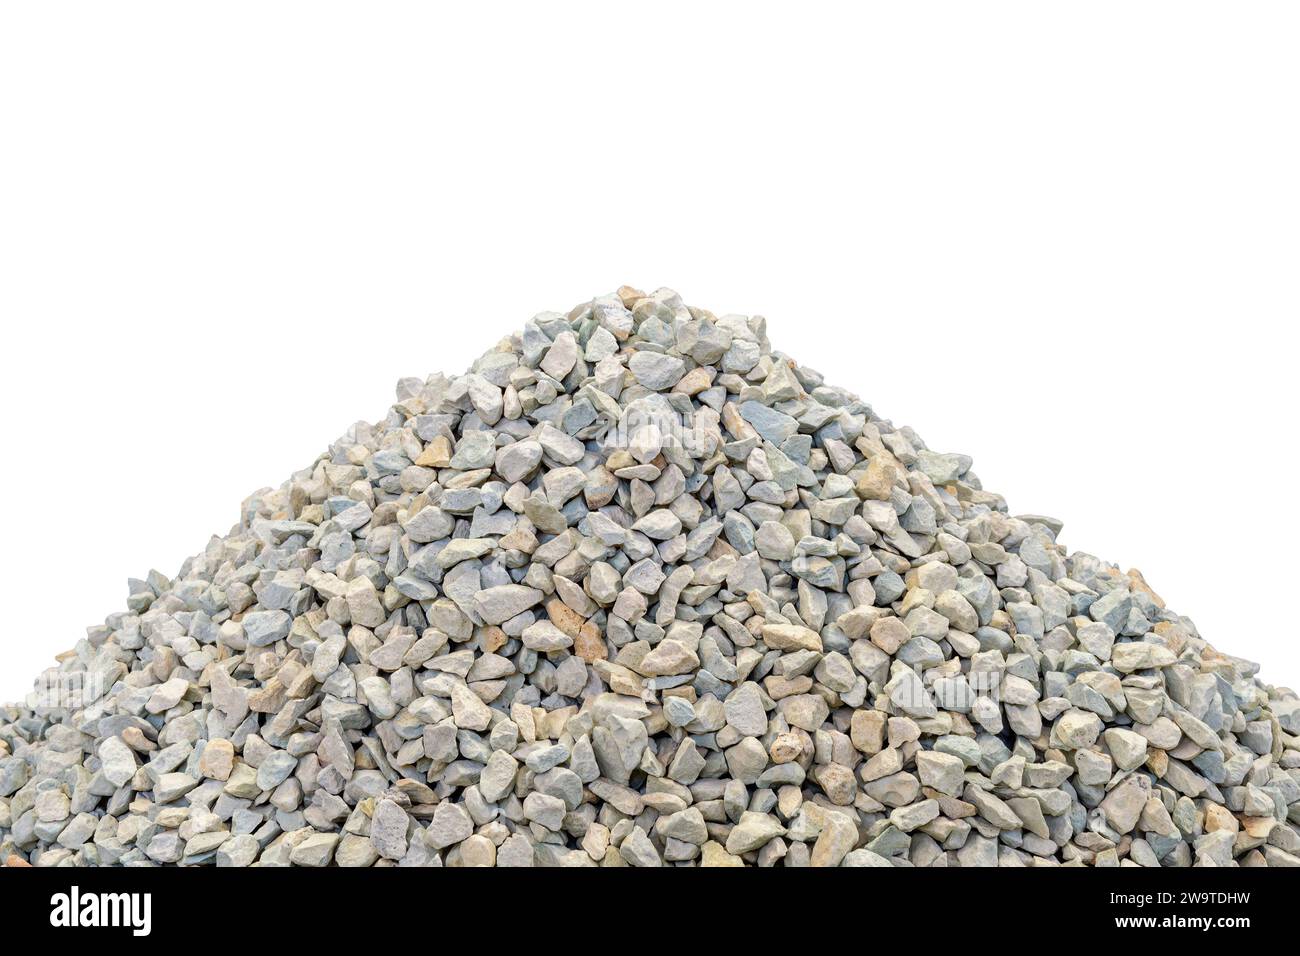 Crushed stones of the valuable mineral zeolite. Small pebble fragments are piled in a cone-shaped heap. Isolated. Stock Photo